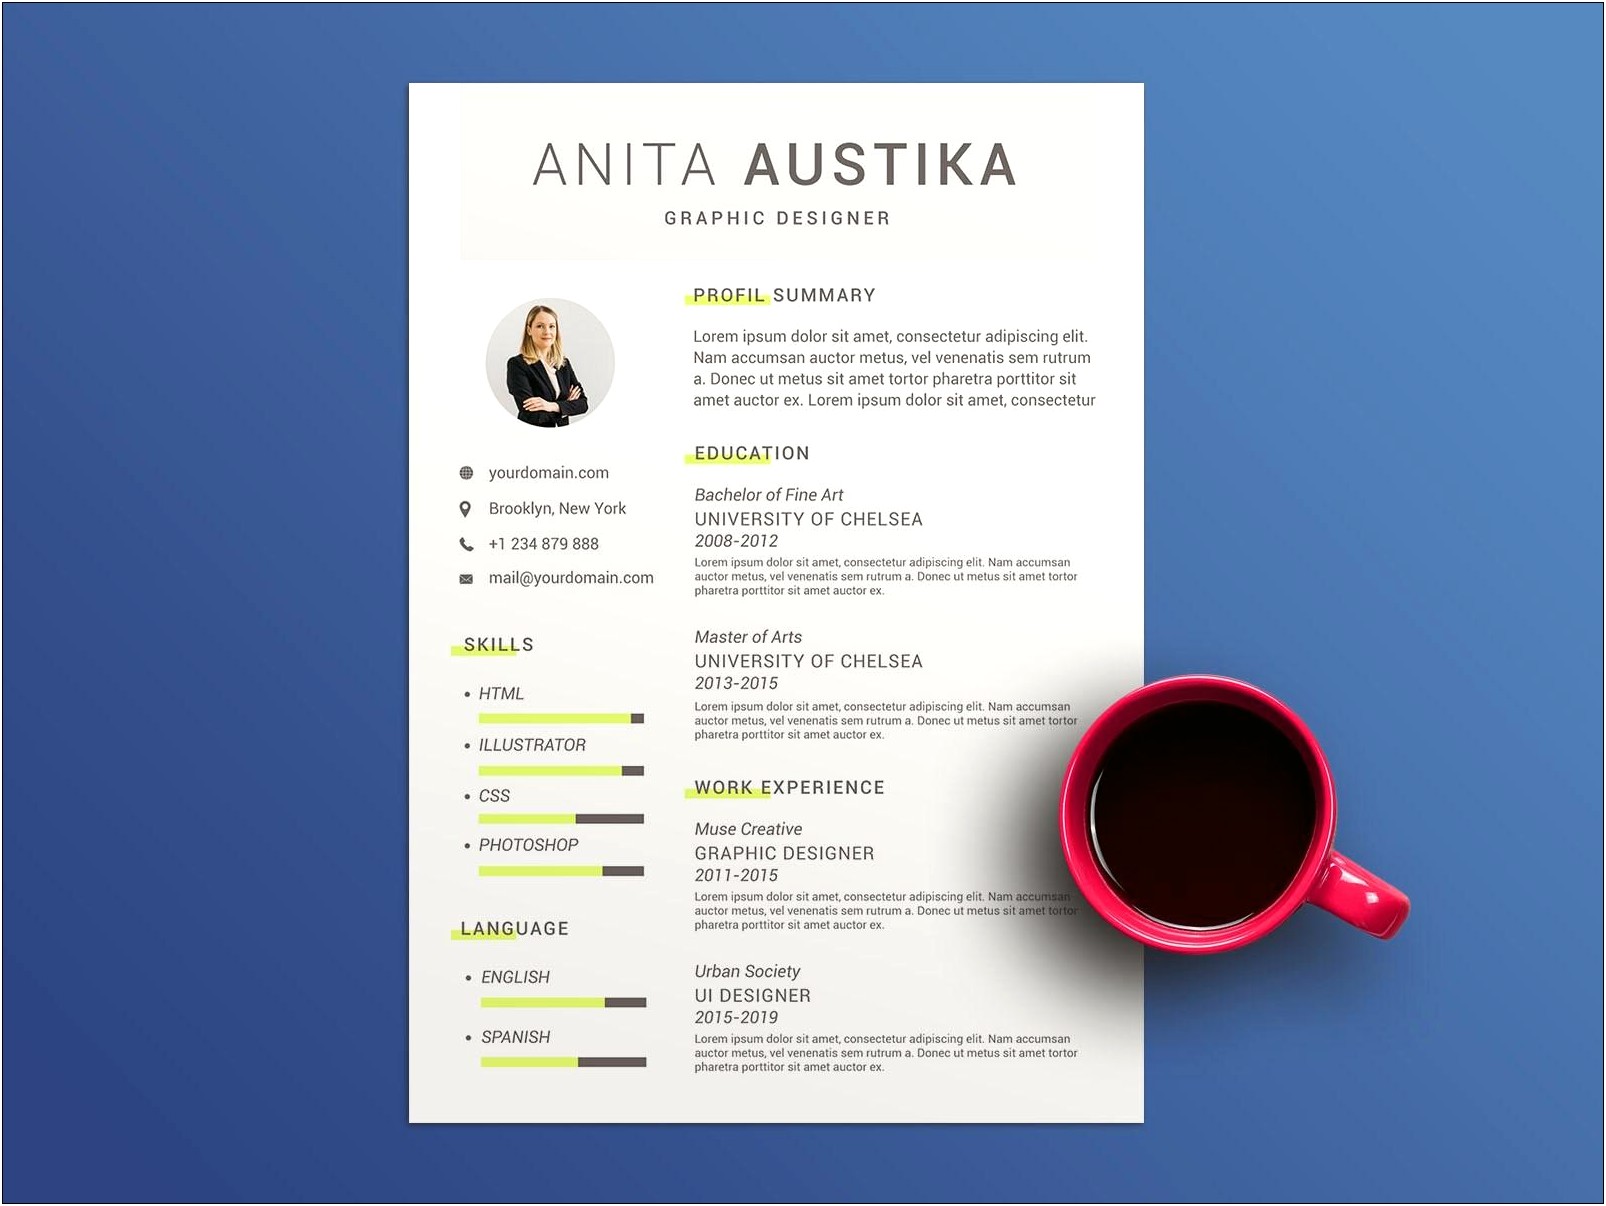 Resume Format For Job Interview Images